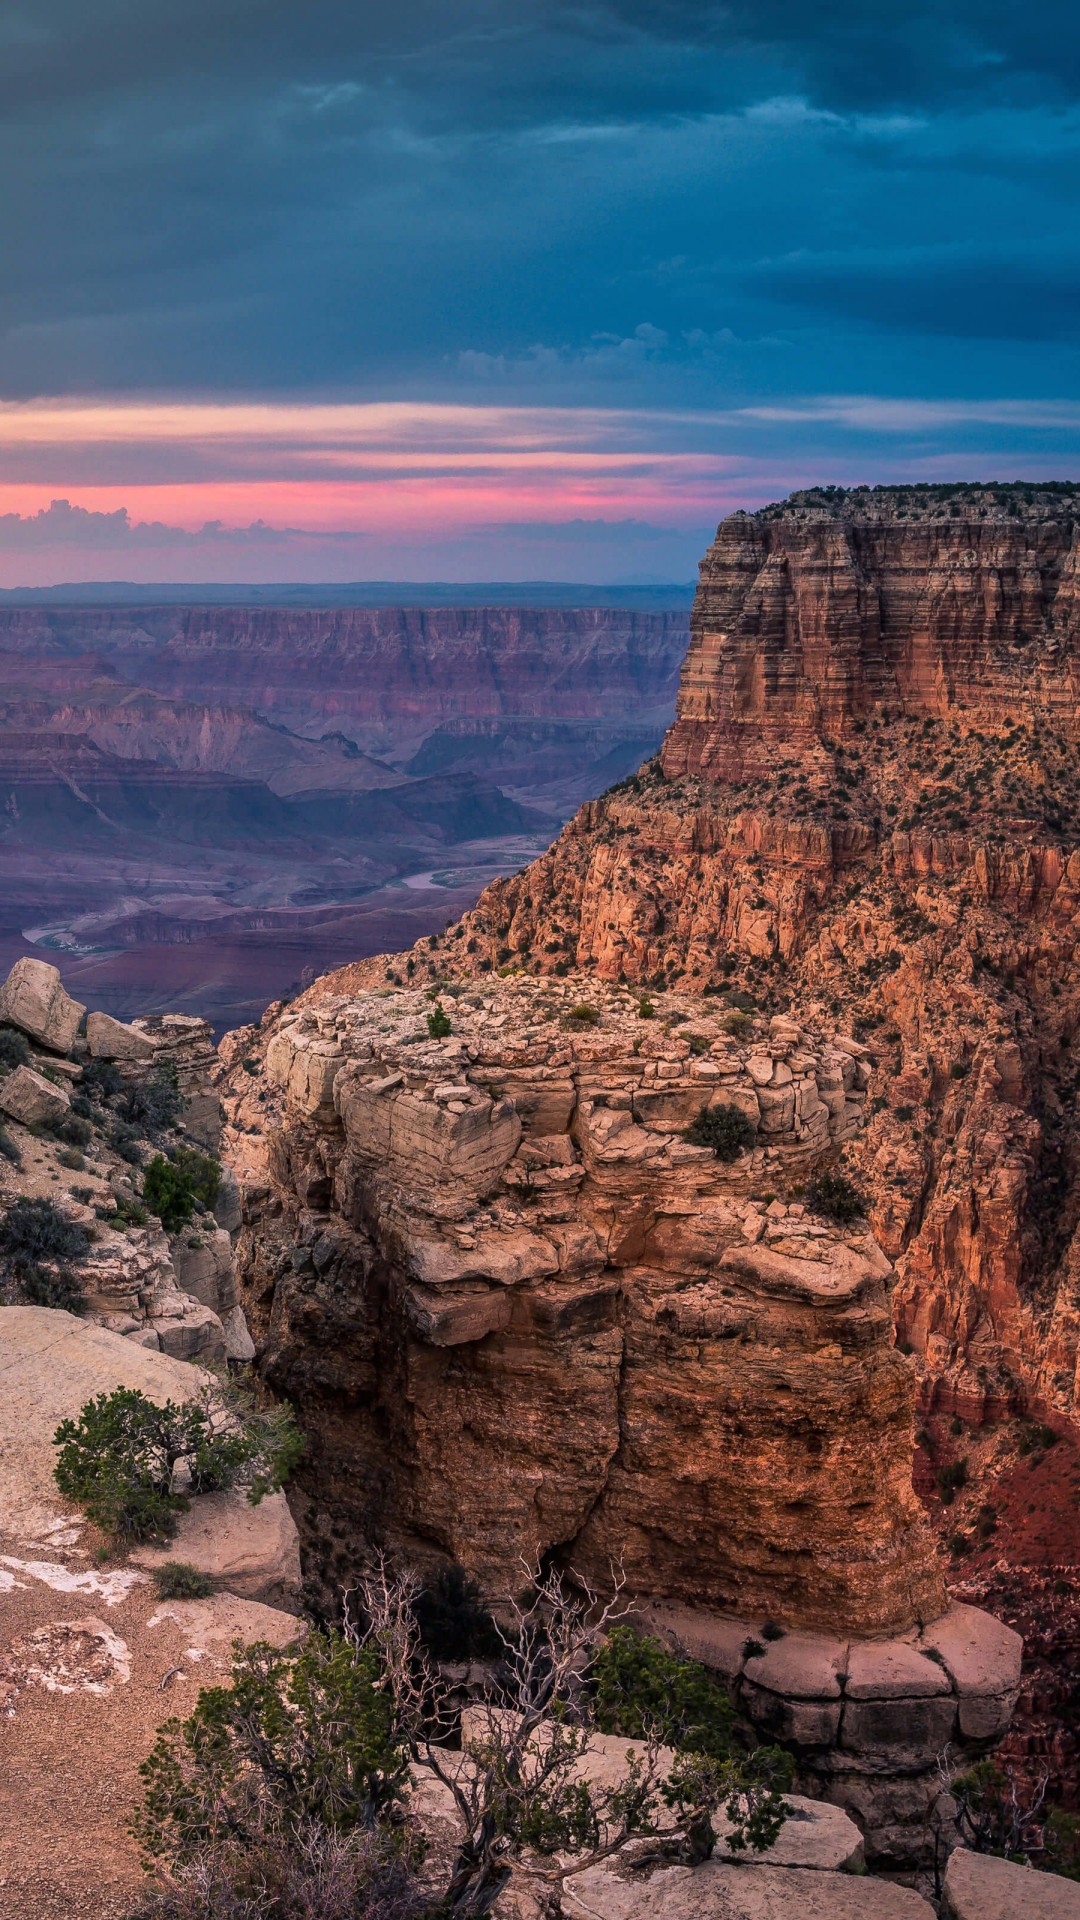 Sunset At The Grand Canyon Wallpaper for Google Nexus 5